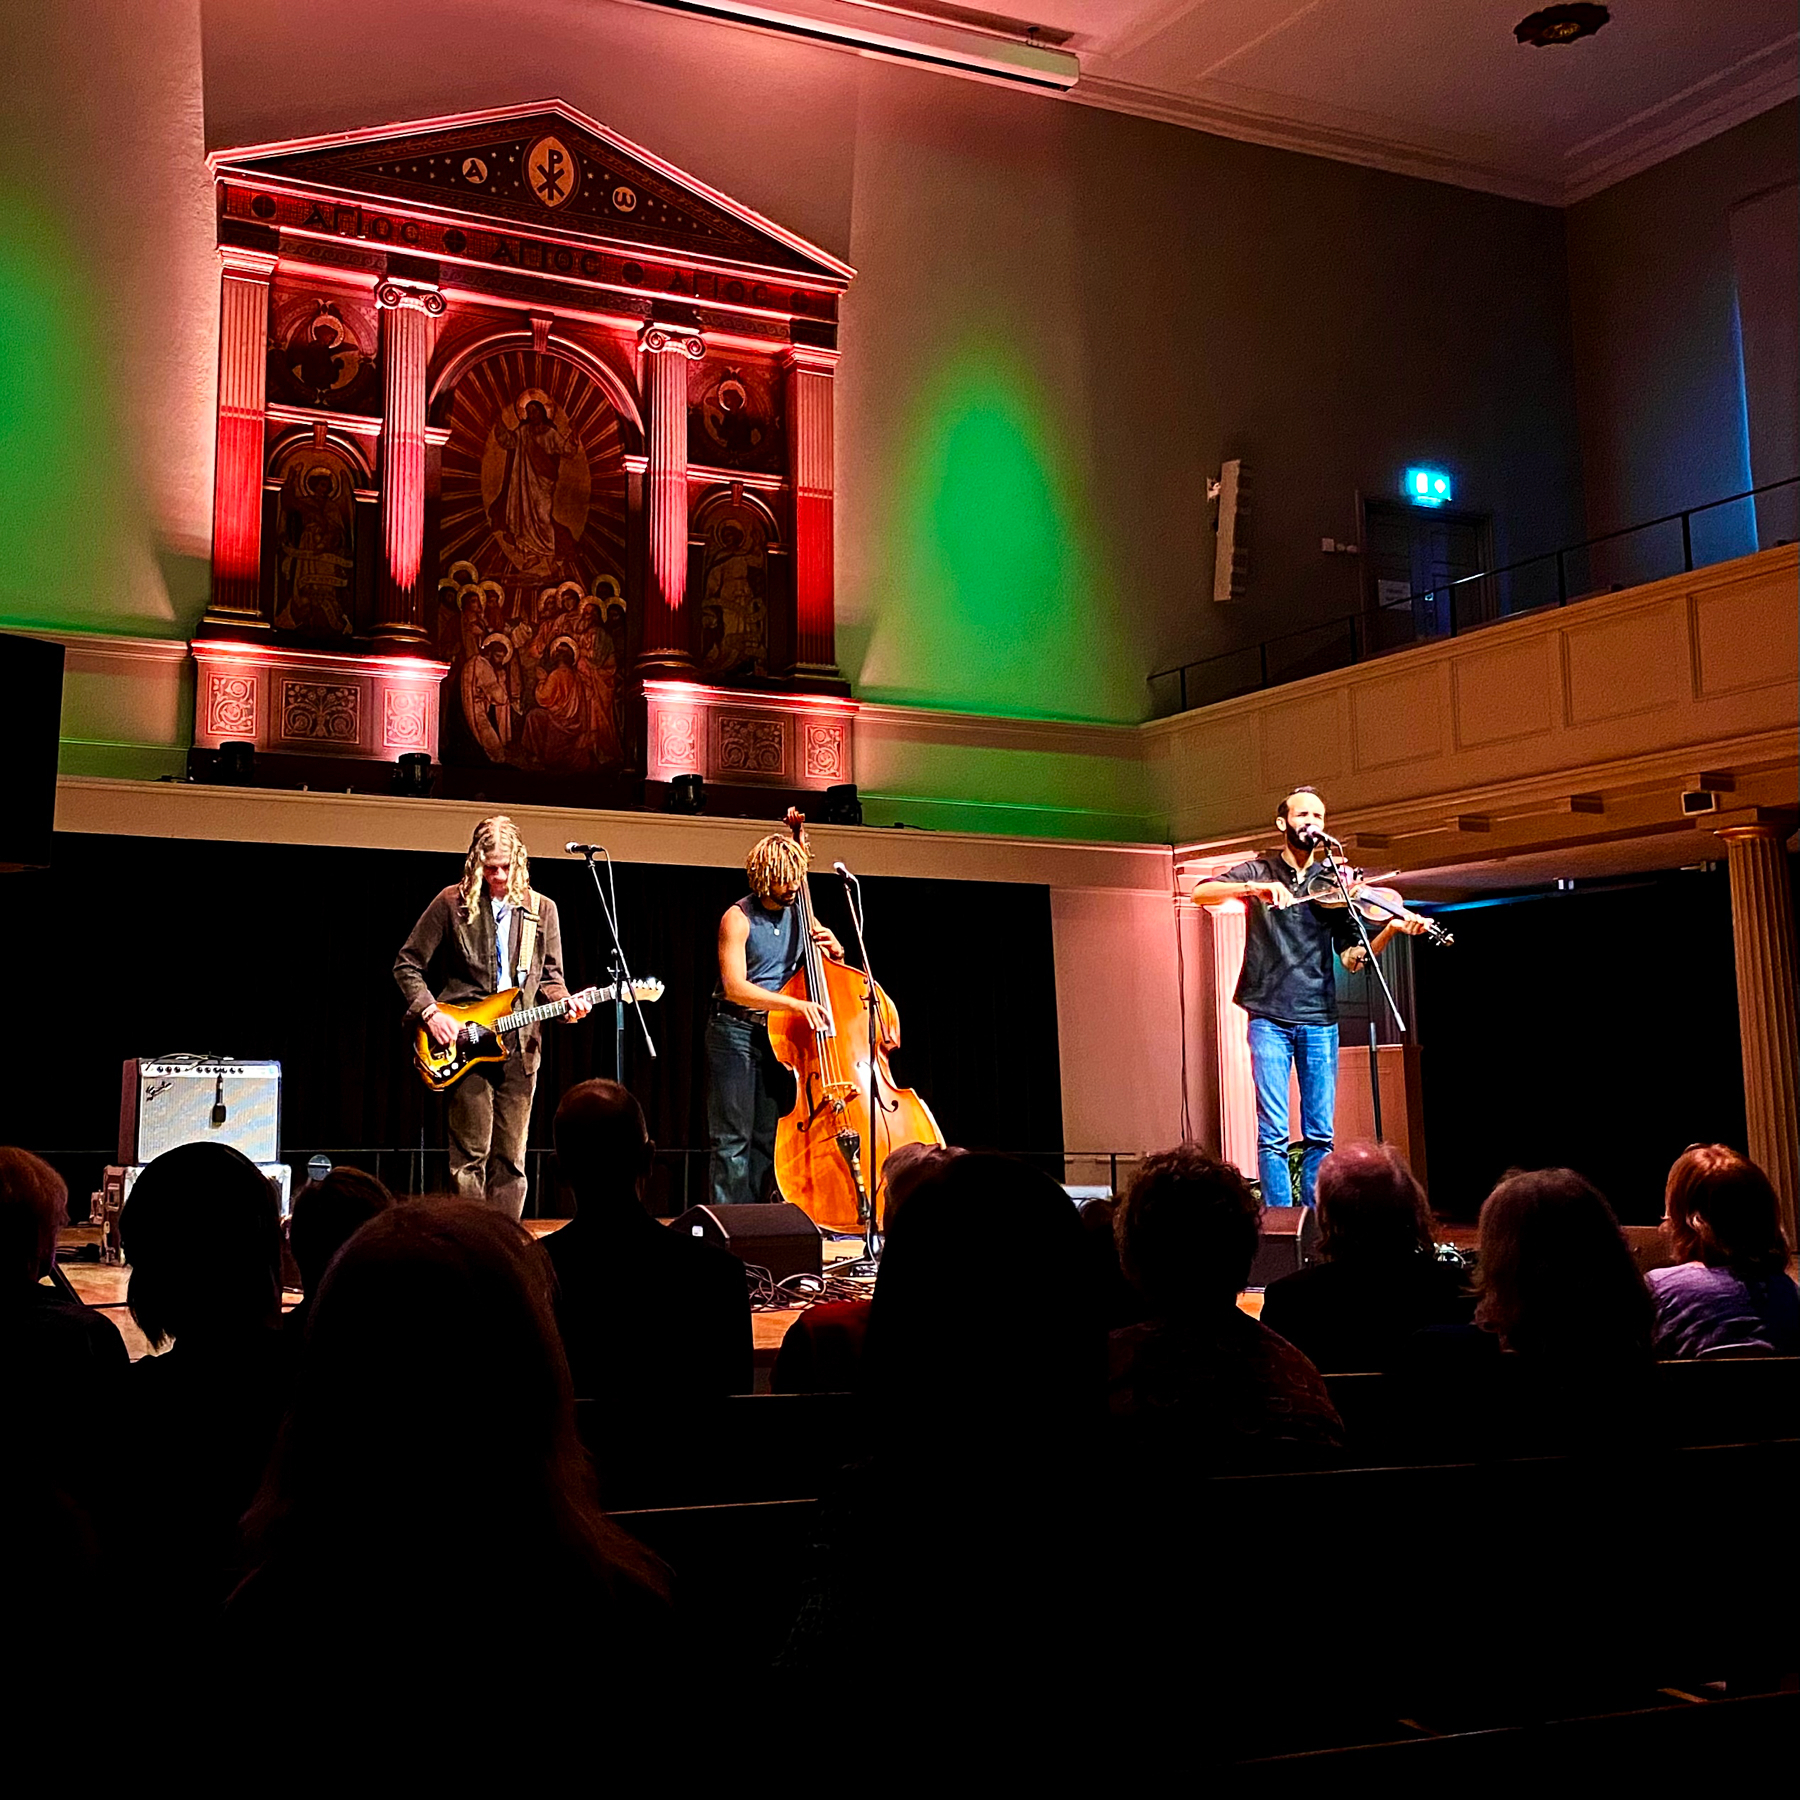 Three musicians perform on stage in a dimly lit venue. One plays an electric guitar, another stands by a double bass, and the third plays a violin. The backdrop features large, illuminated artwork and colorful lighting. An audience watches the performance.